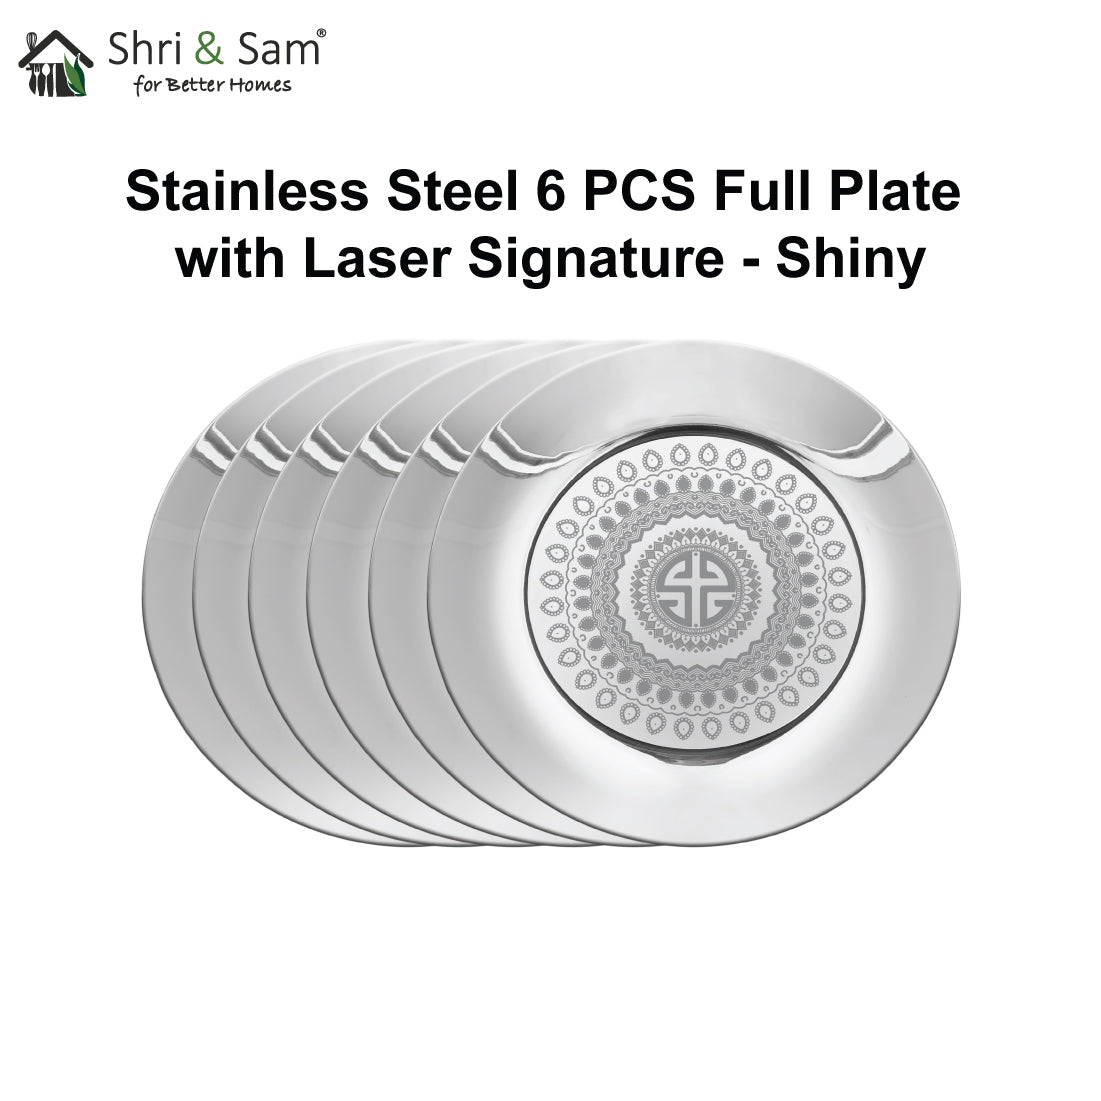 Stainless Steel 6 PCS Full Plate with Laser Signature - Shiny